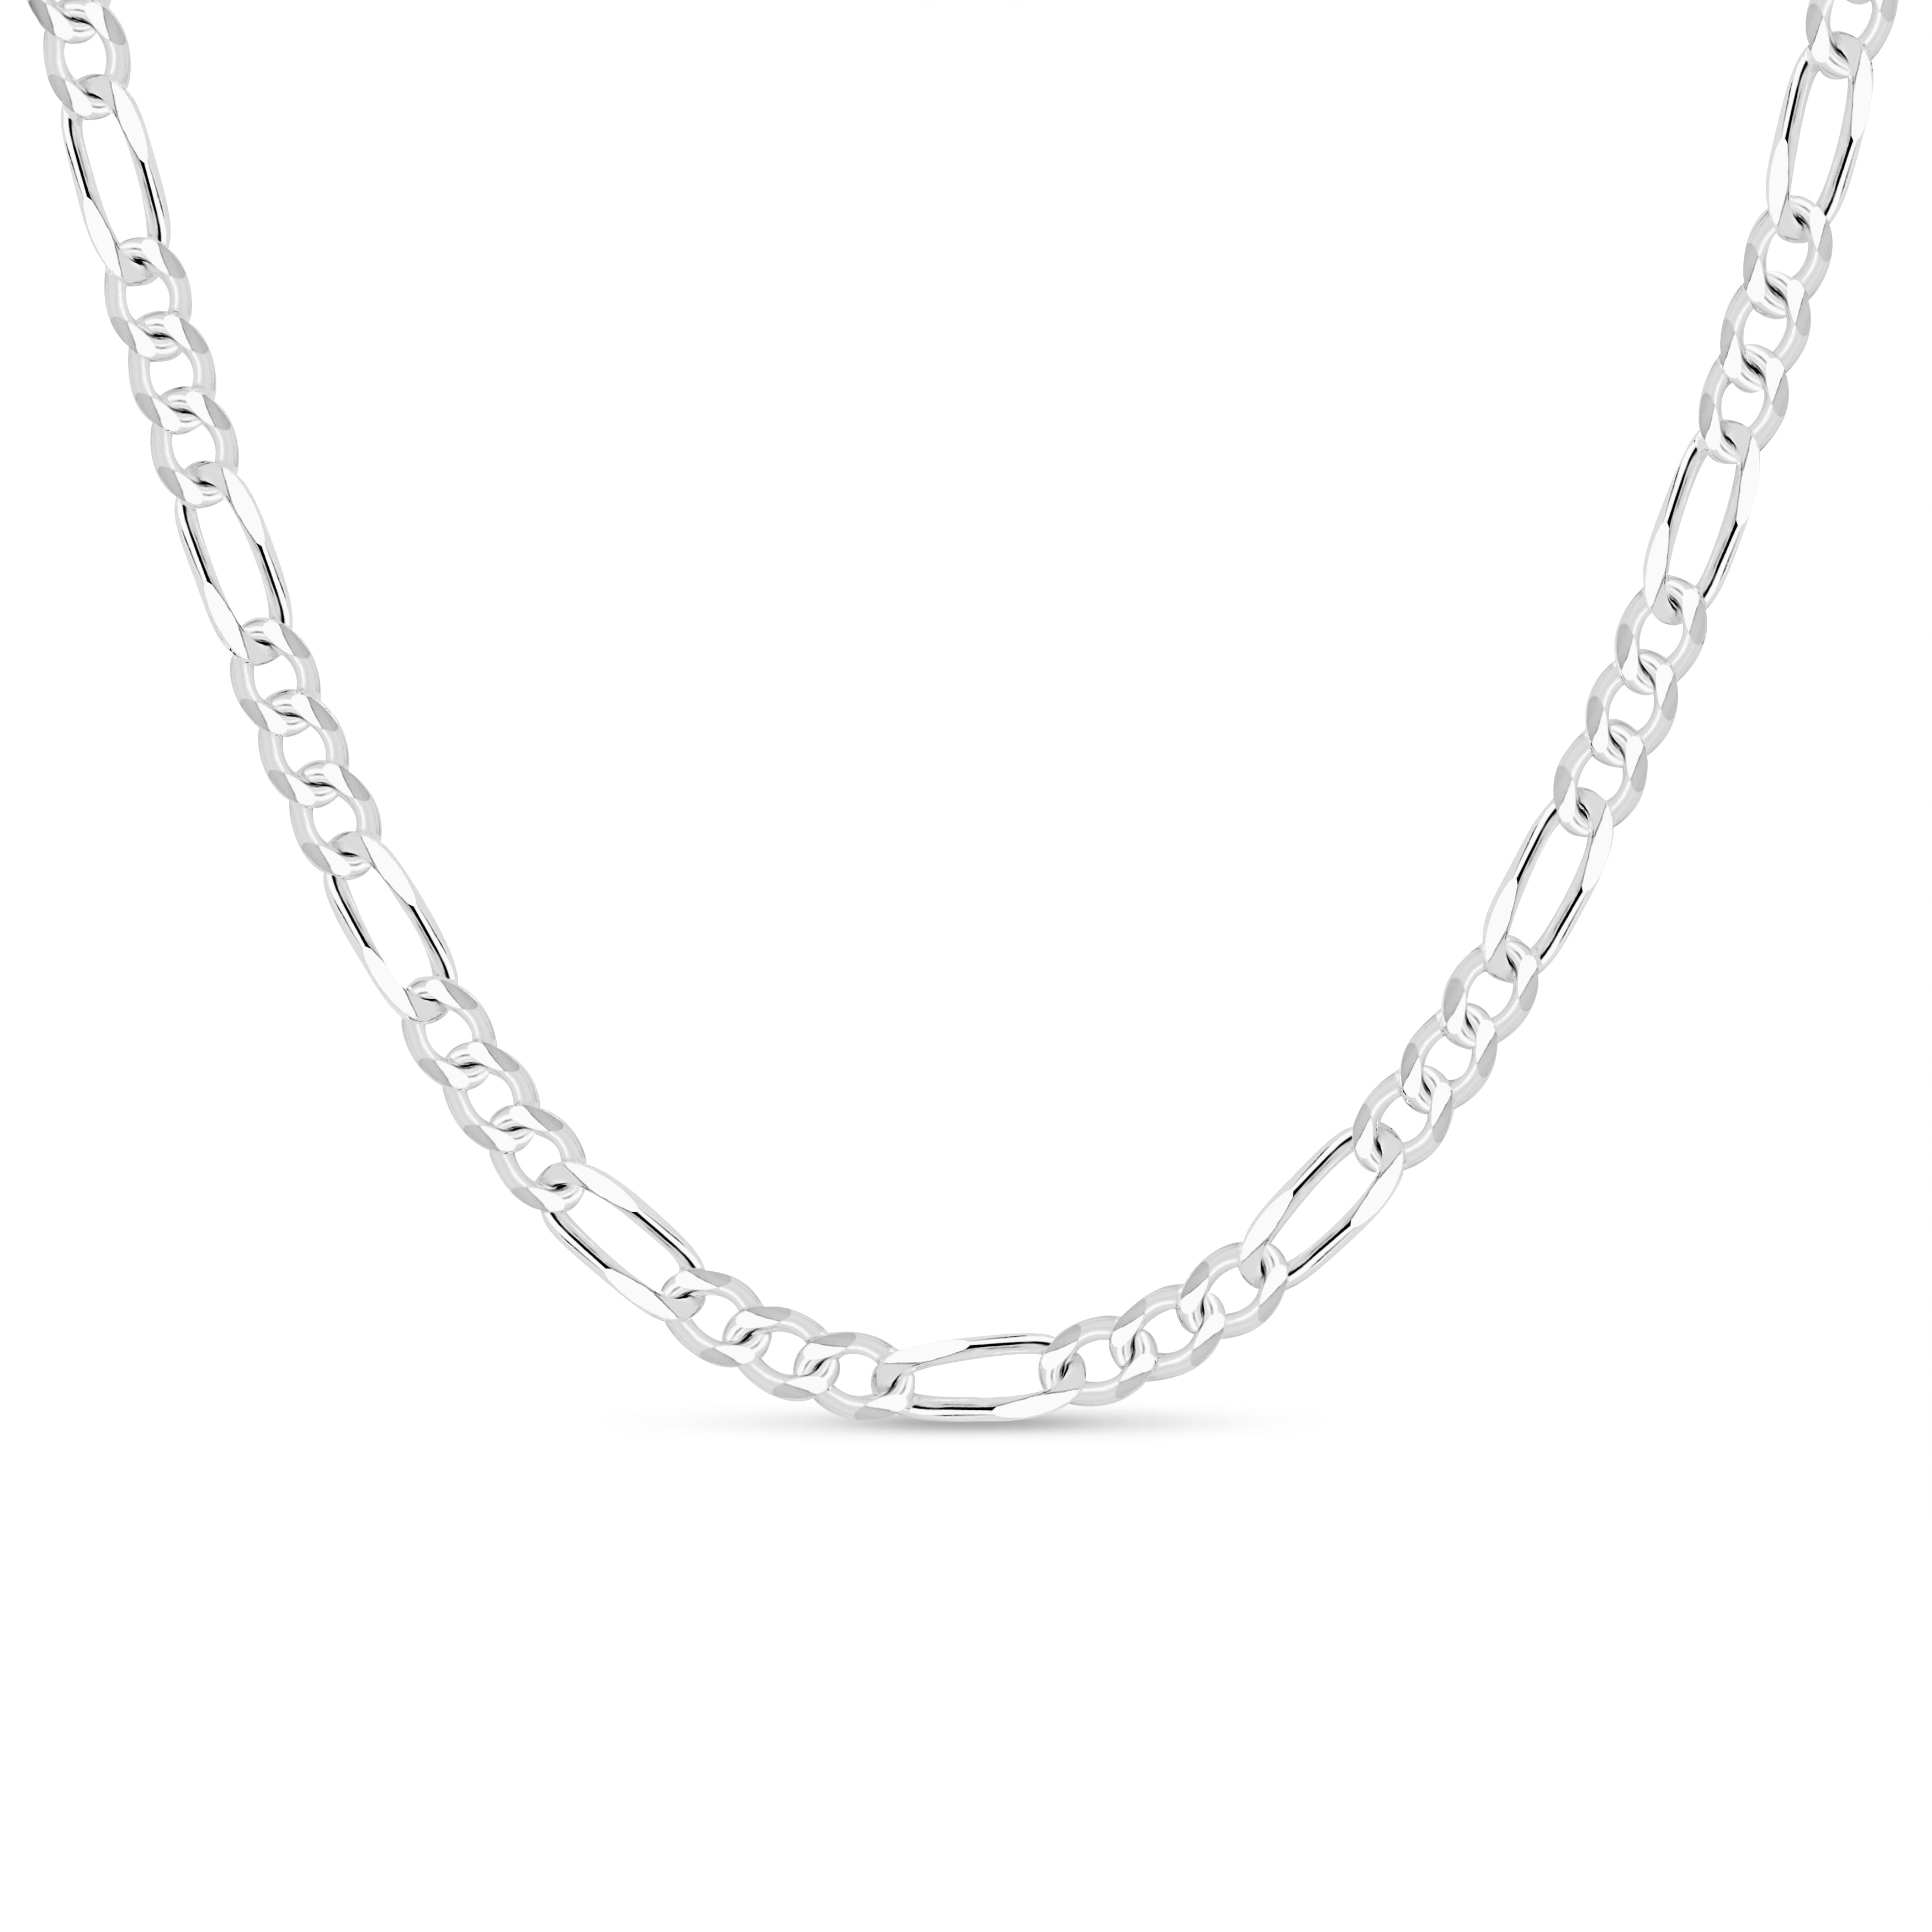 Men's 5.5mm 150 Gauge Figaro Chain Solid .925 Sterling Silver Necklace 22" inches - Walmart.com